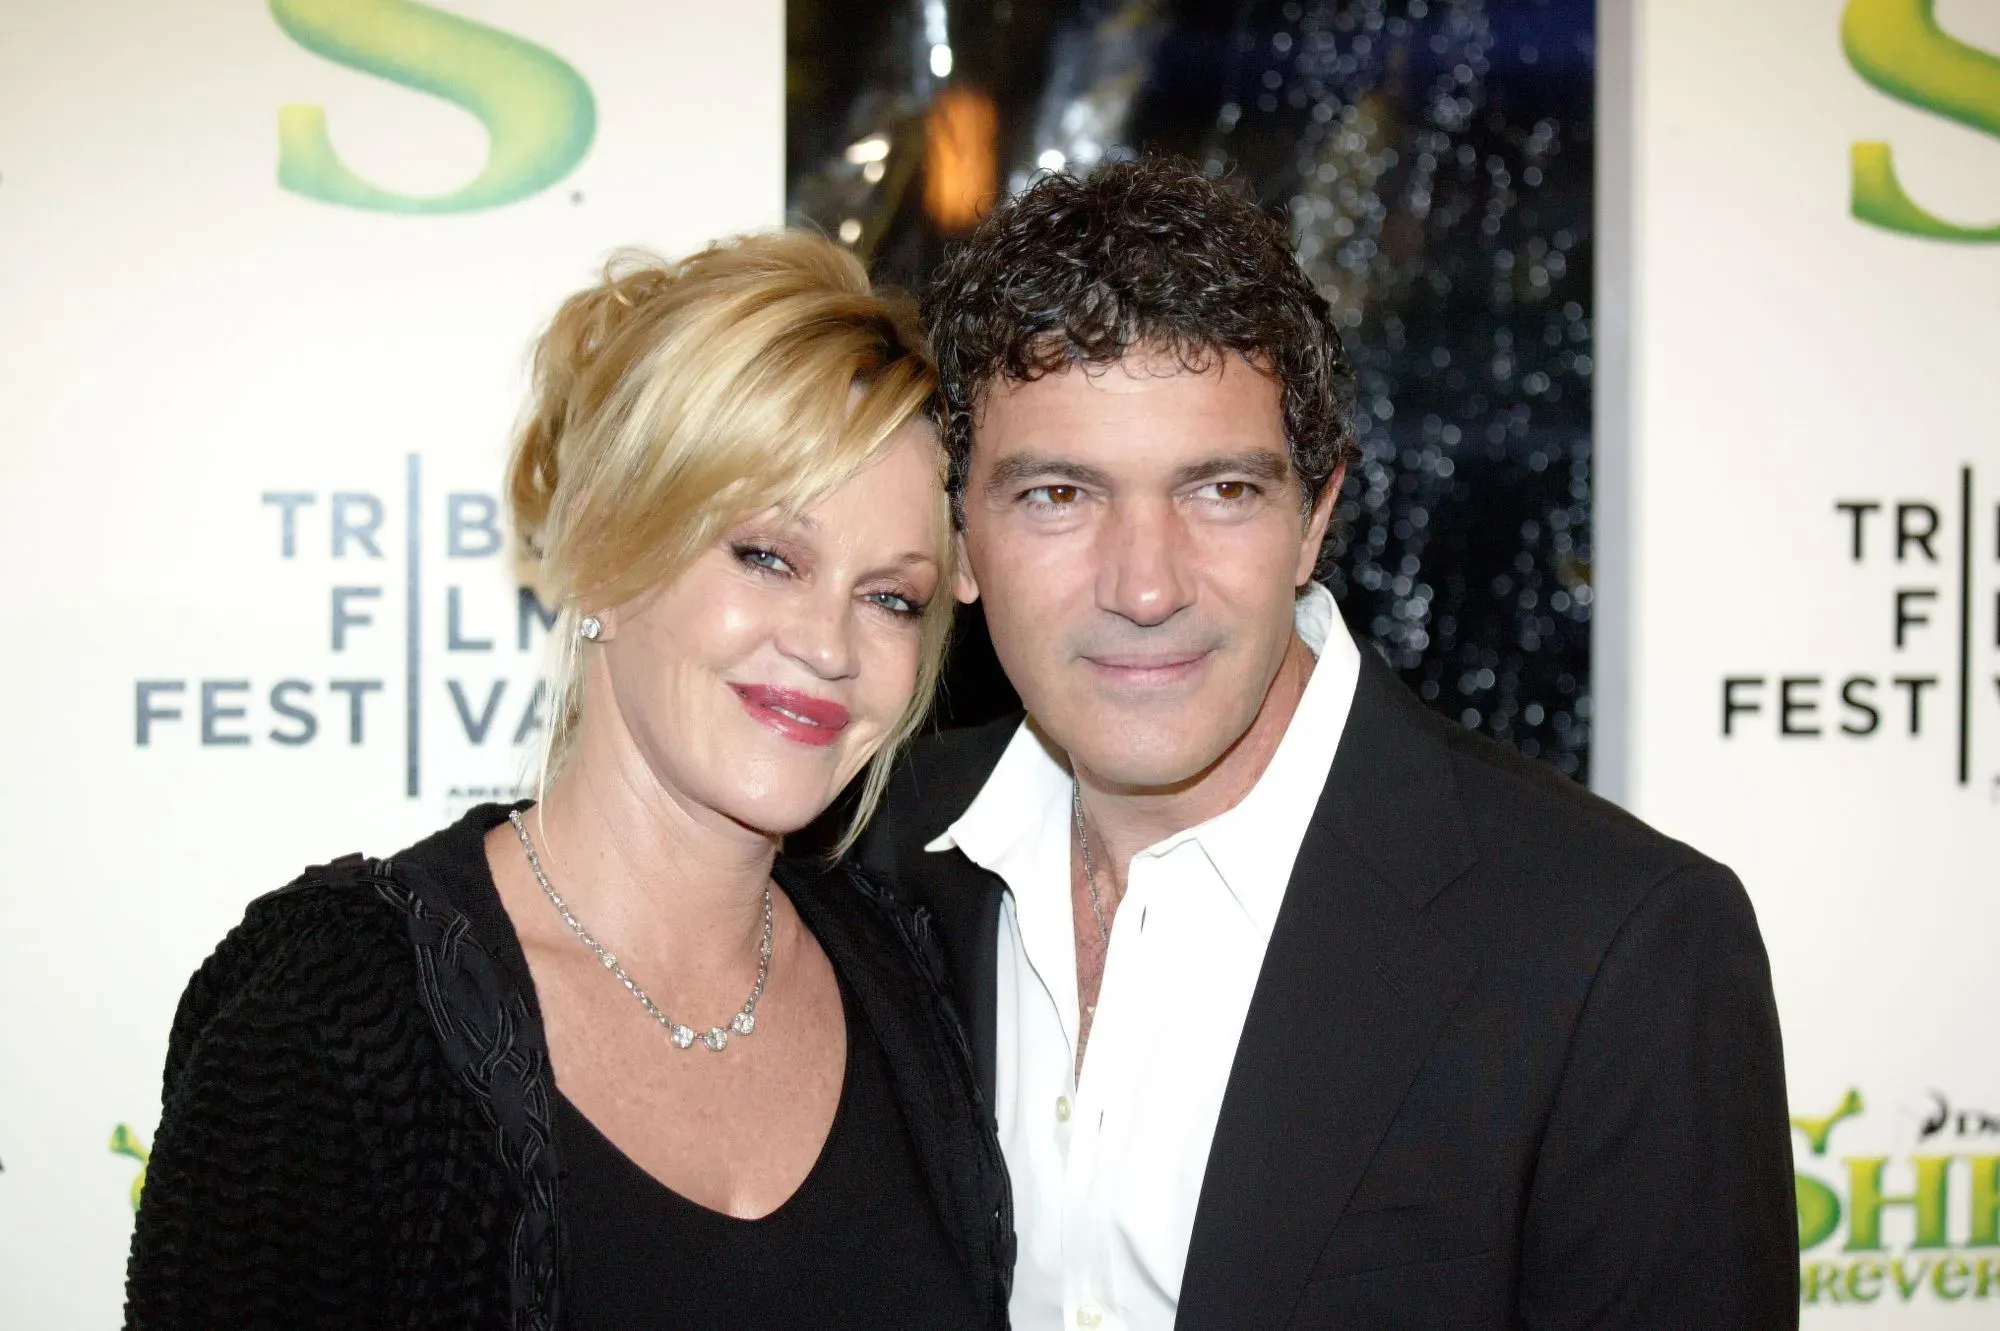 The wedding ceremony of Antonio Banderas and Melanie Griffith was a private affair held in London.